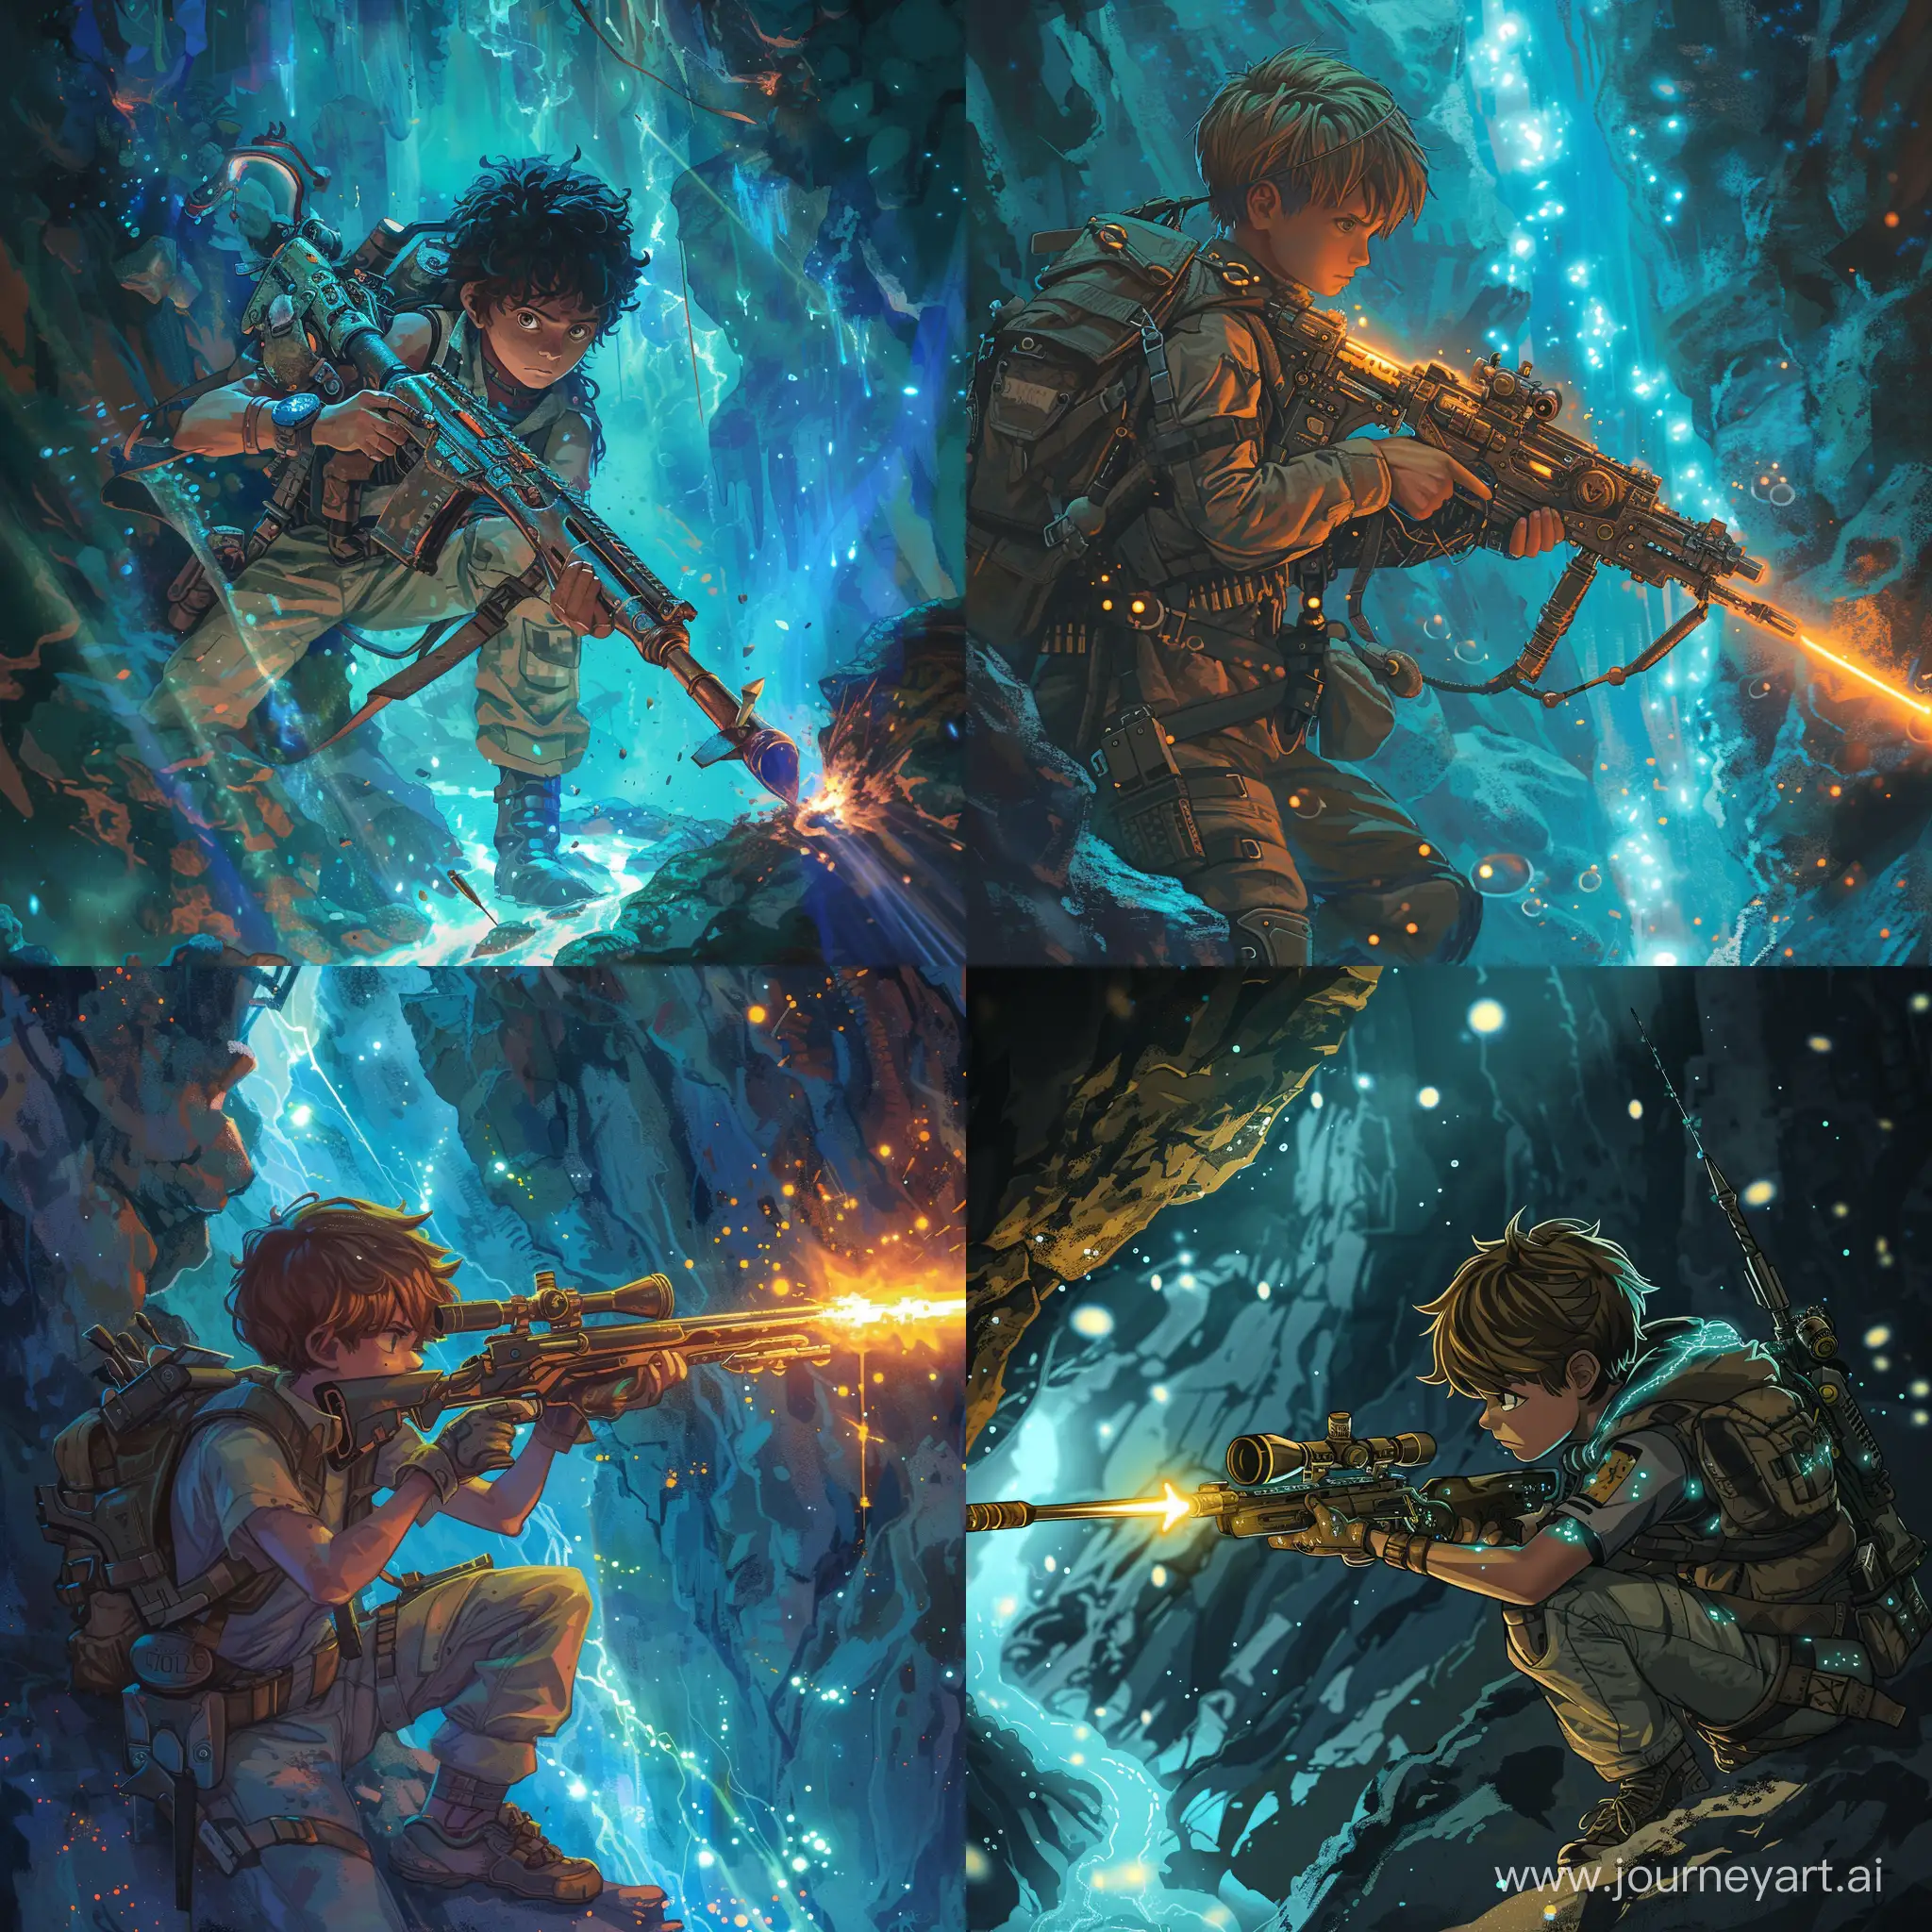 A 13-year-old cave raider with a stylistic rifle, exploring a luminous abyss. Capture his youthful determination and the mystical allure of the abyss in a detailed, anime-inspired style. Focus on his adventurous spirit, the intricate design of his gear and rifle, and the glowing, mysterious environment around him. Aim for a dynamic, high-resolution image that blends realism with fantasy, showcasing the boy ready for the depths below.